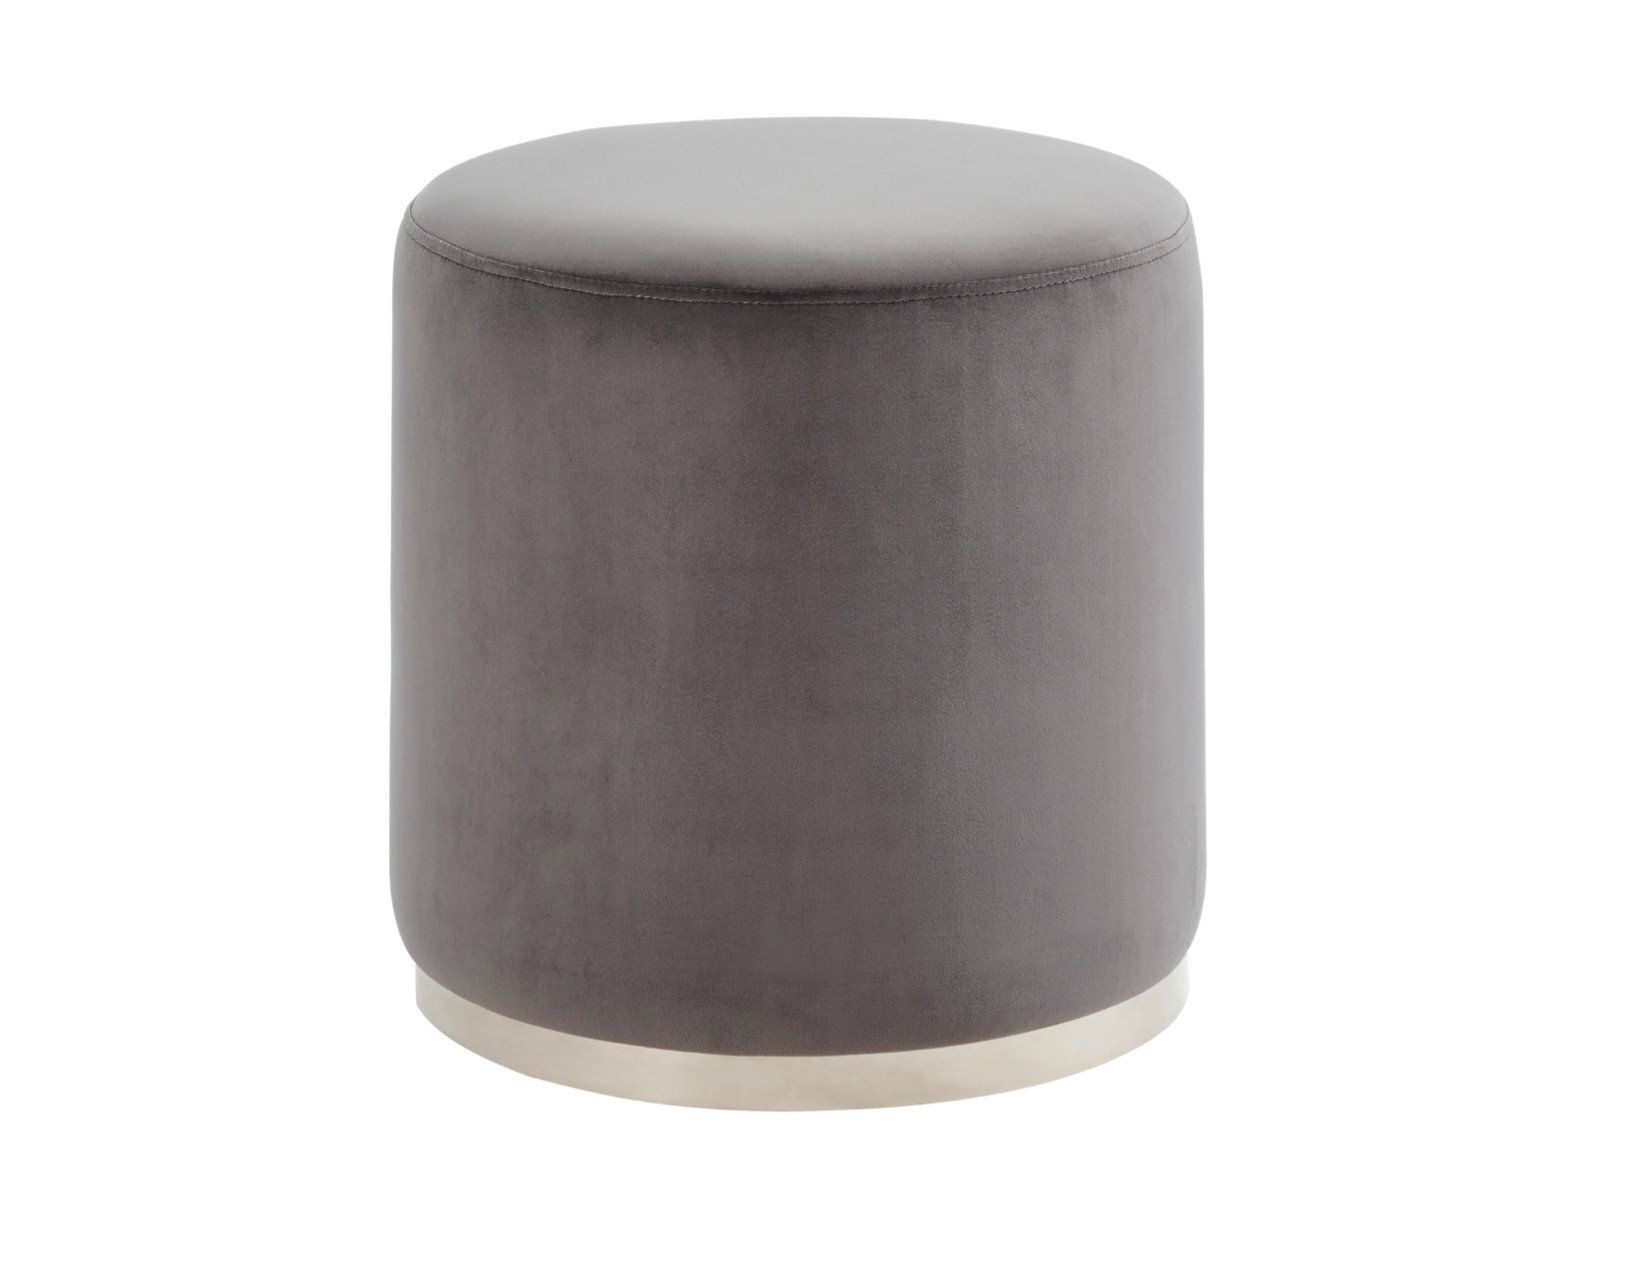 Allmodern Garland Upholstered Ottoman & Reviews | Wayfair Pertaining To Upholstery Soft Silver Ottomans (View 2 of 15)